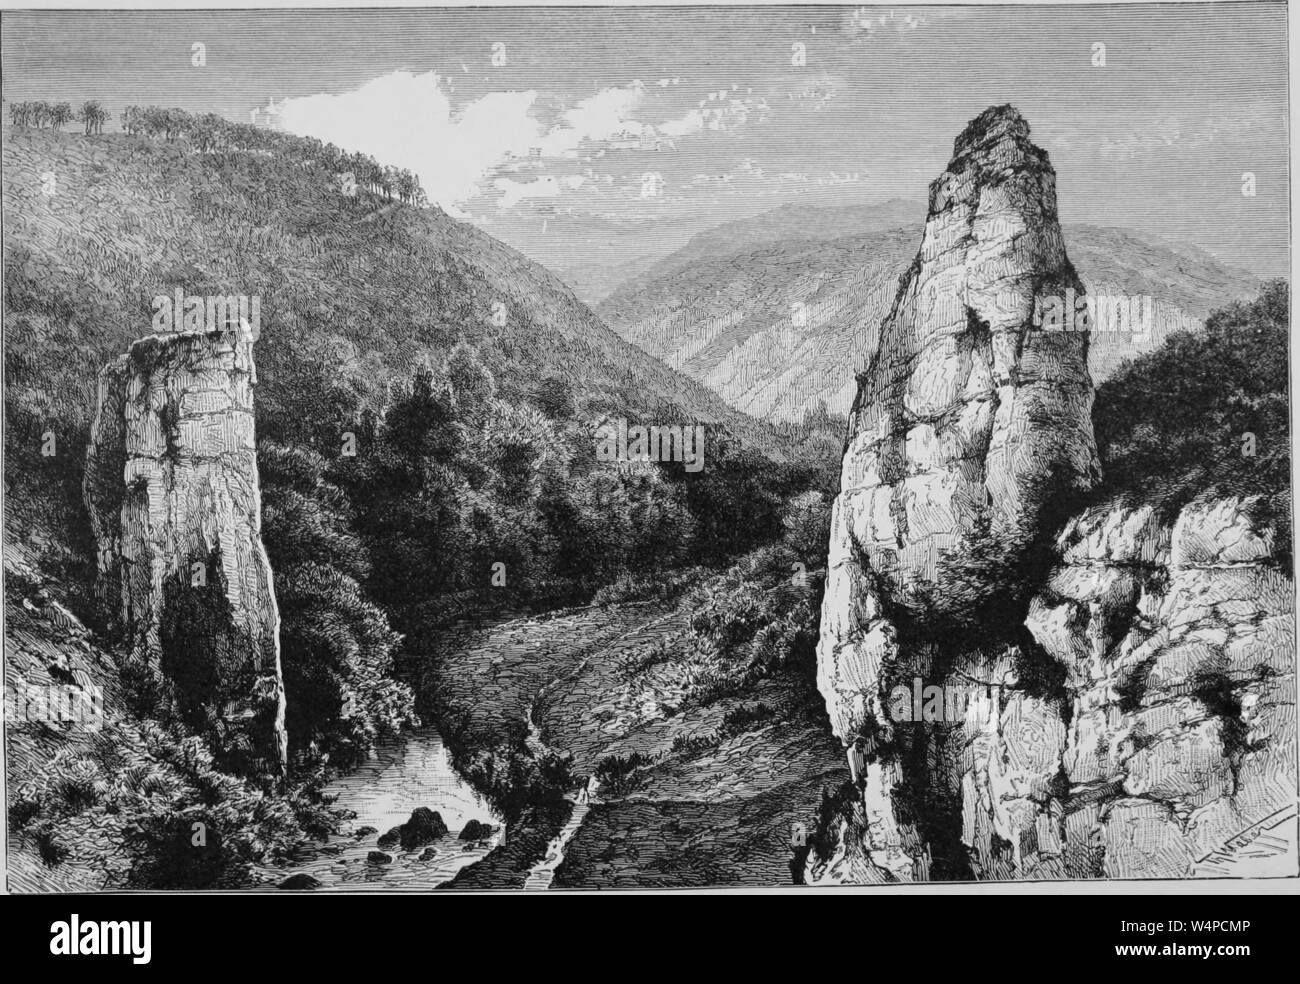 Engraving of the Ilam Rock, Dovedale, England, from the book 'The earth and its inhabitants' by Elisee Reclus, 1881. Courtesy Internet Archive. () Stock Photo